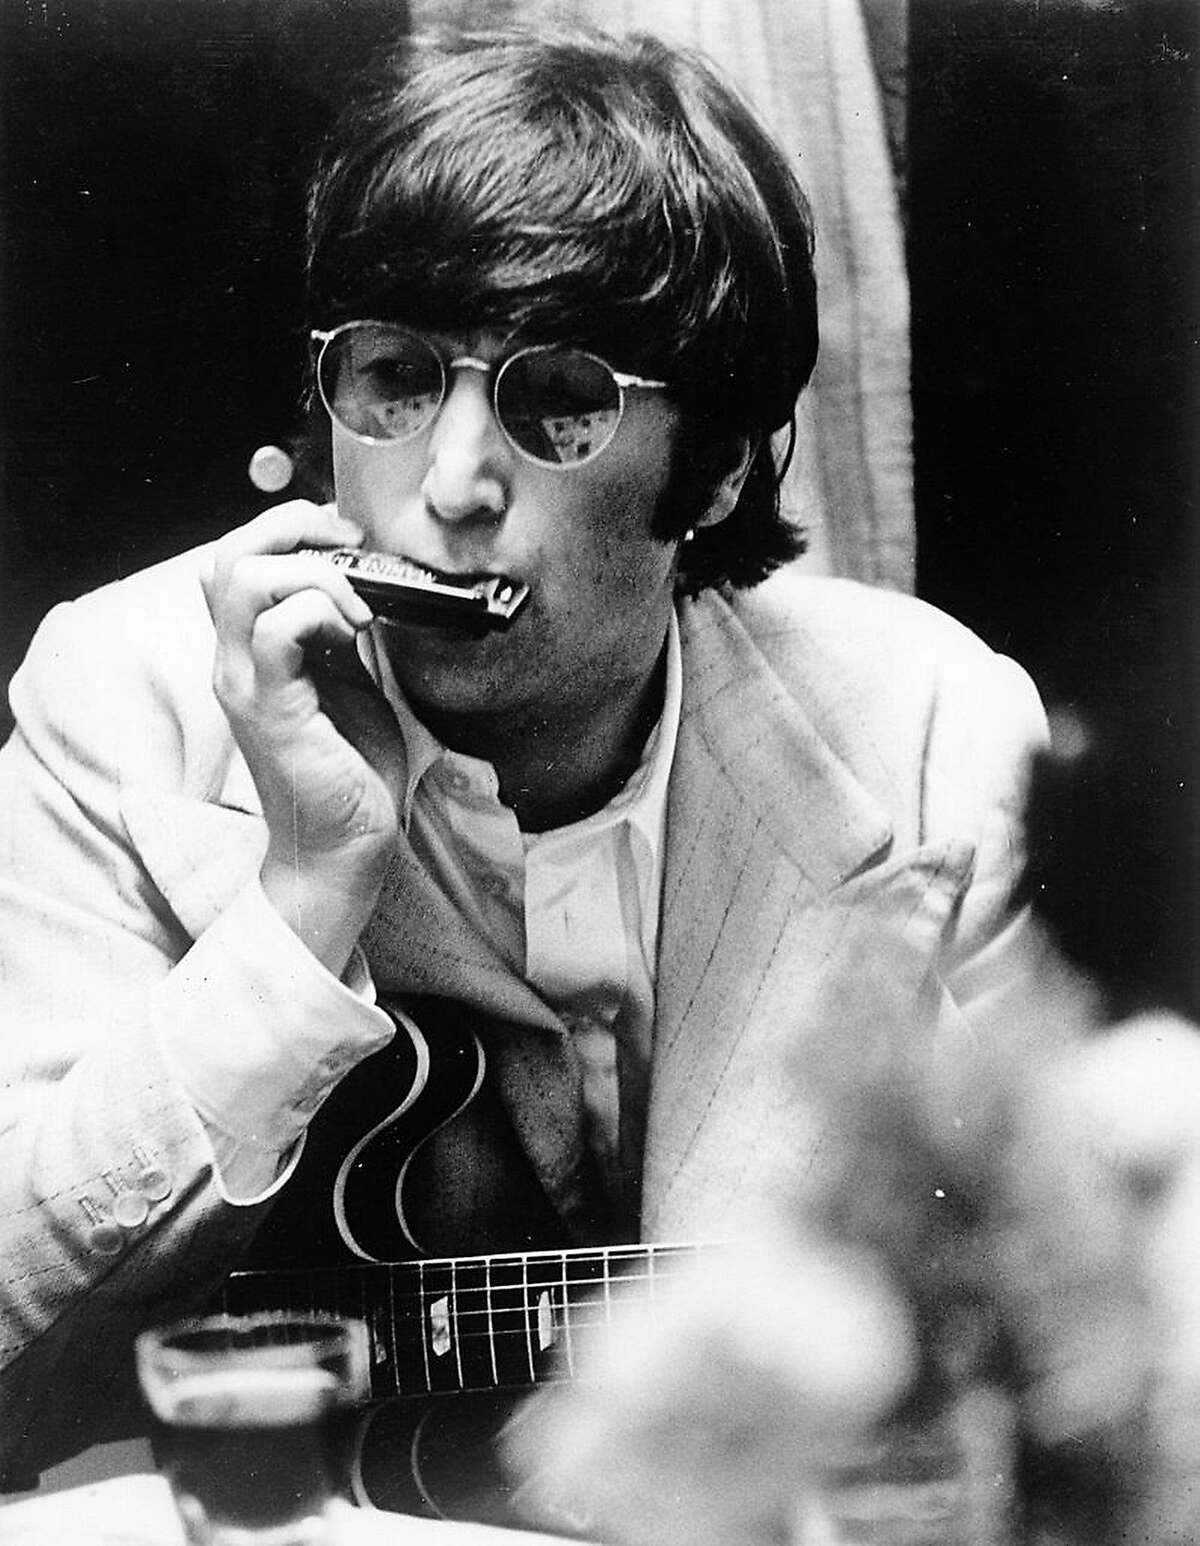 Beatles candids from 50 years ago, when John pissed off the Christians